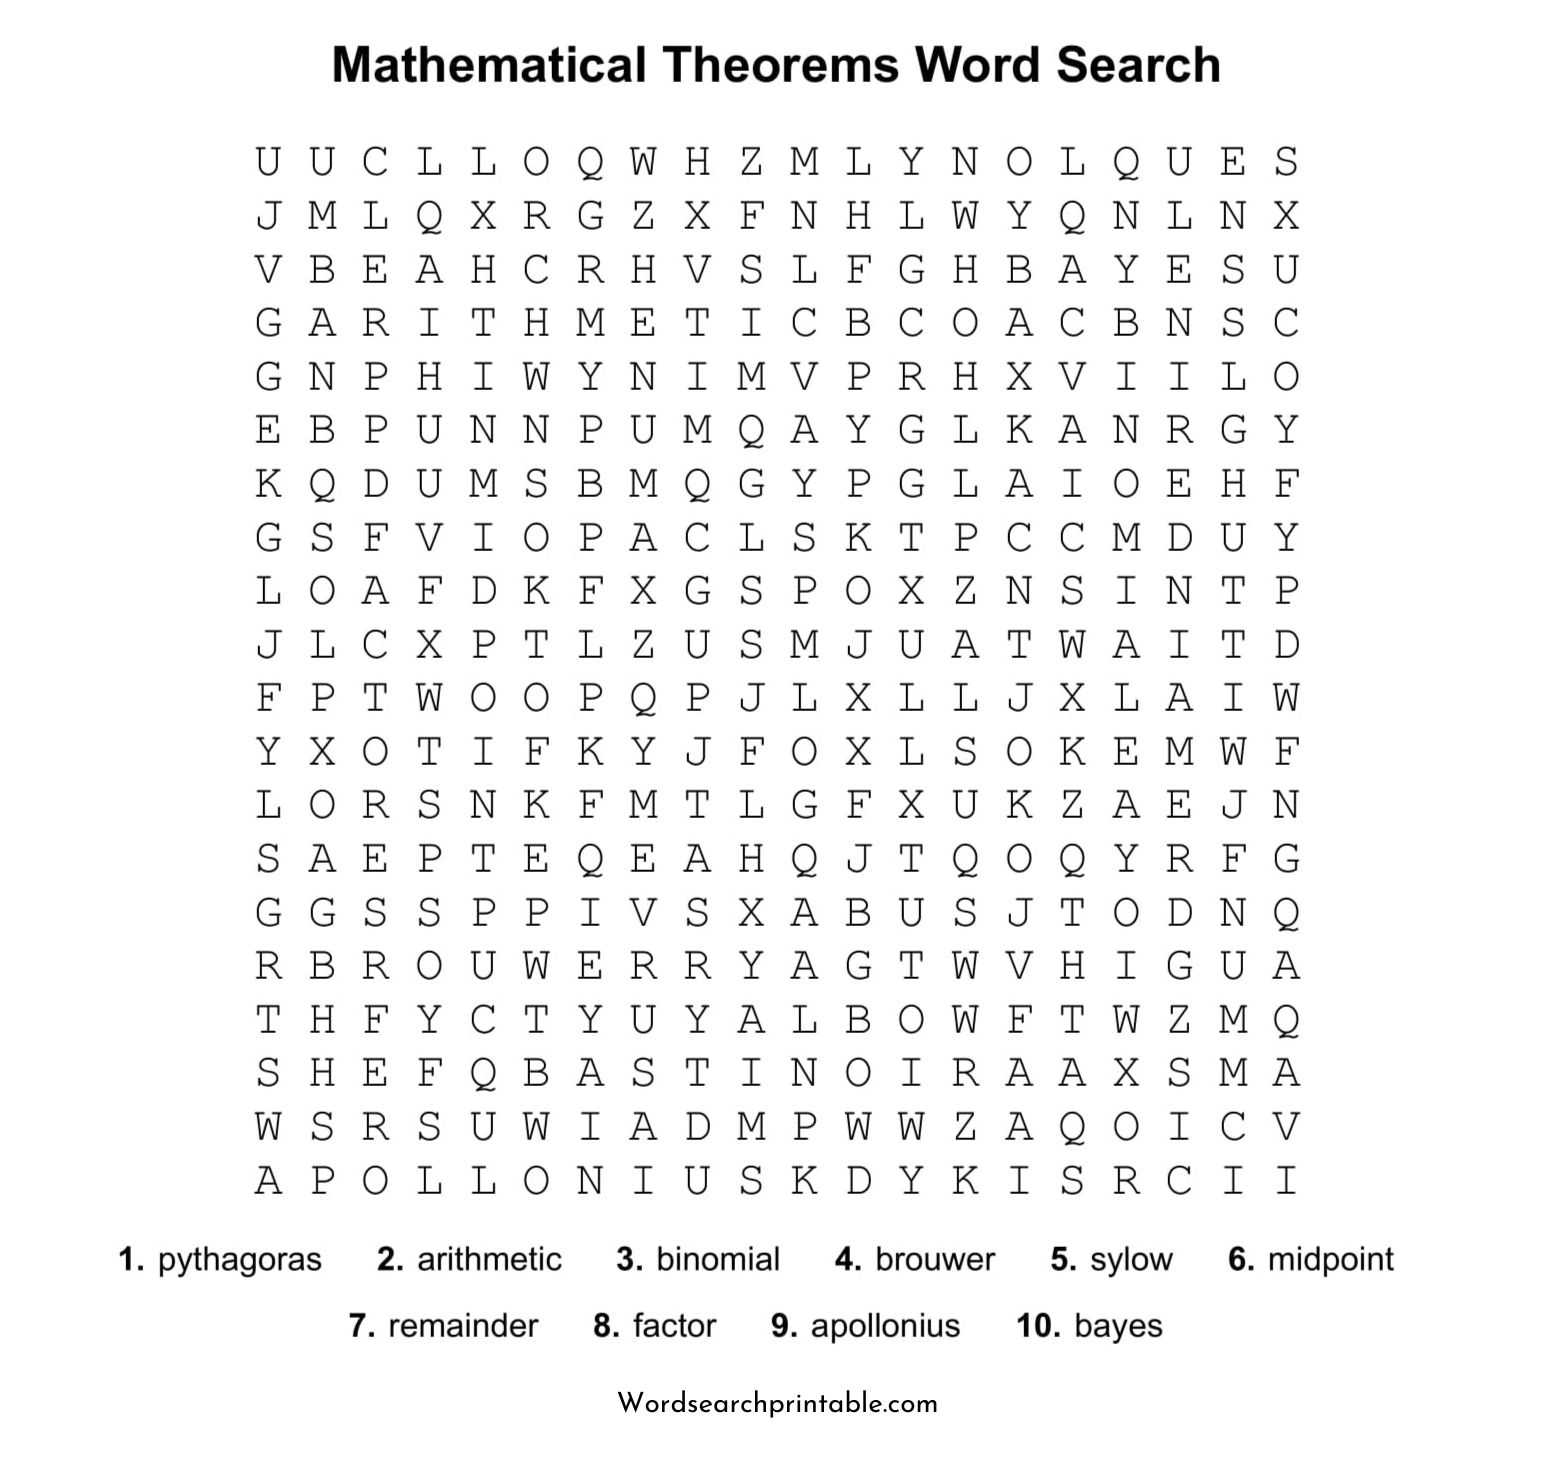 mathematical theorems word search puzzle